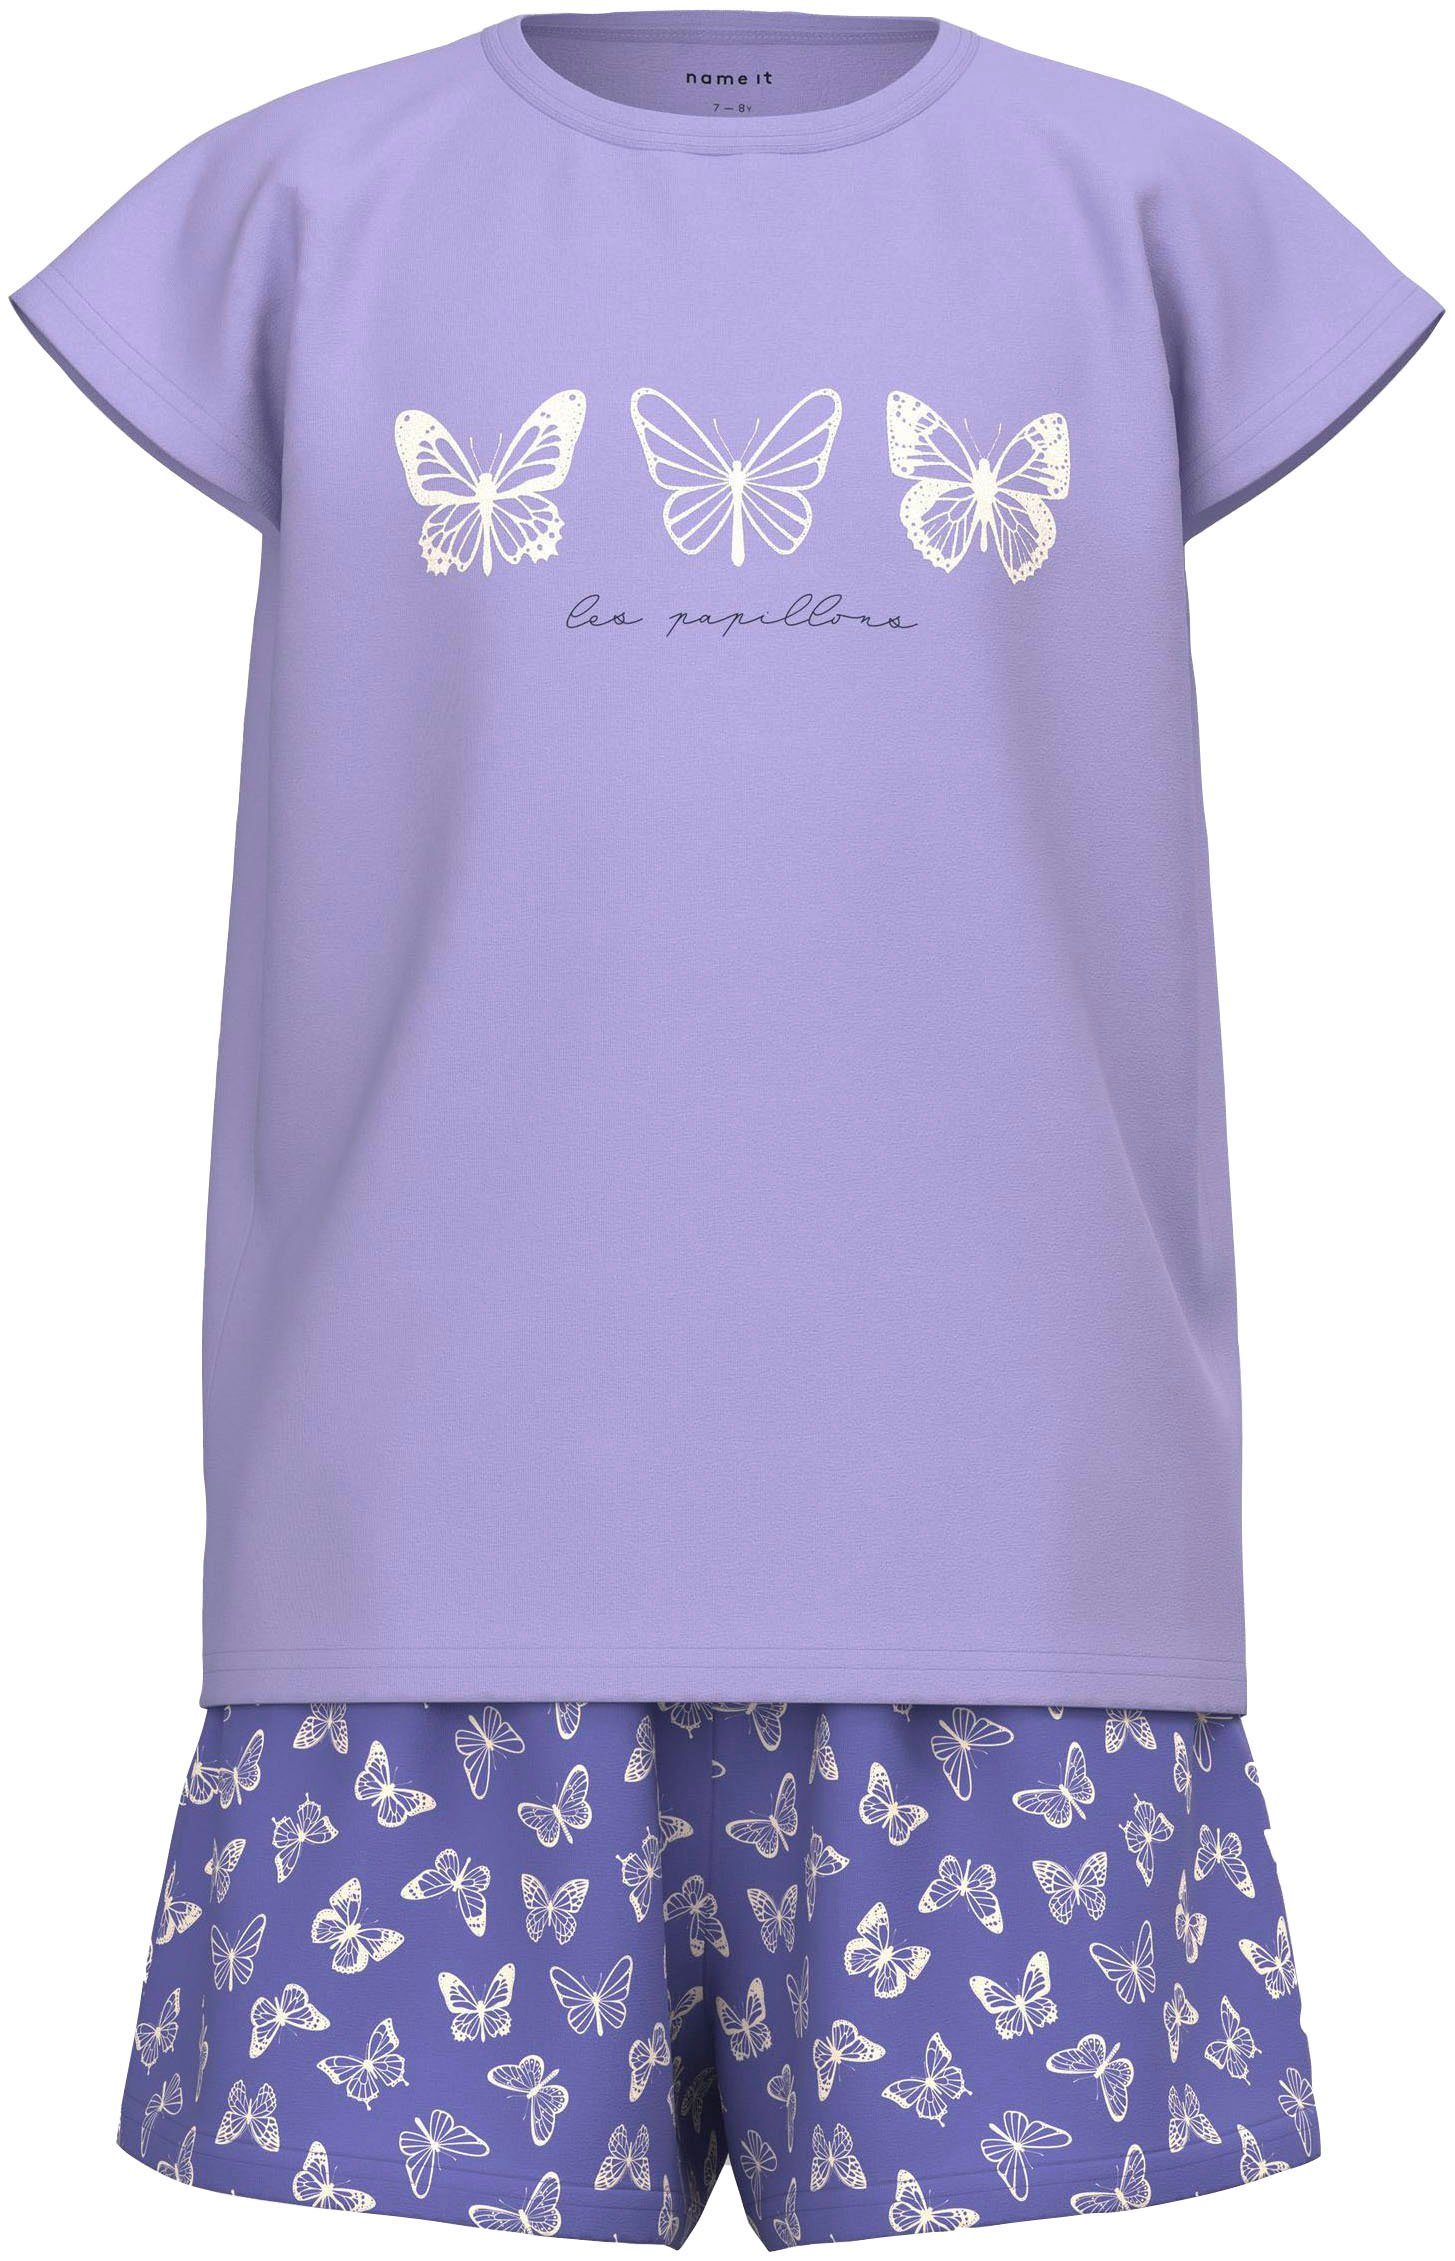 Schmetterling mit 2 Name CAP NKFNIGHTSET BUTTERFLY tlg) (Packung, Shorty NOOS Druck It